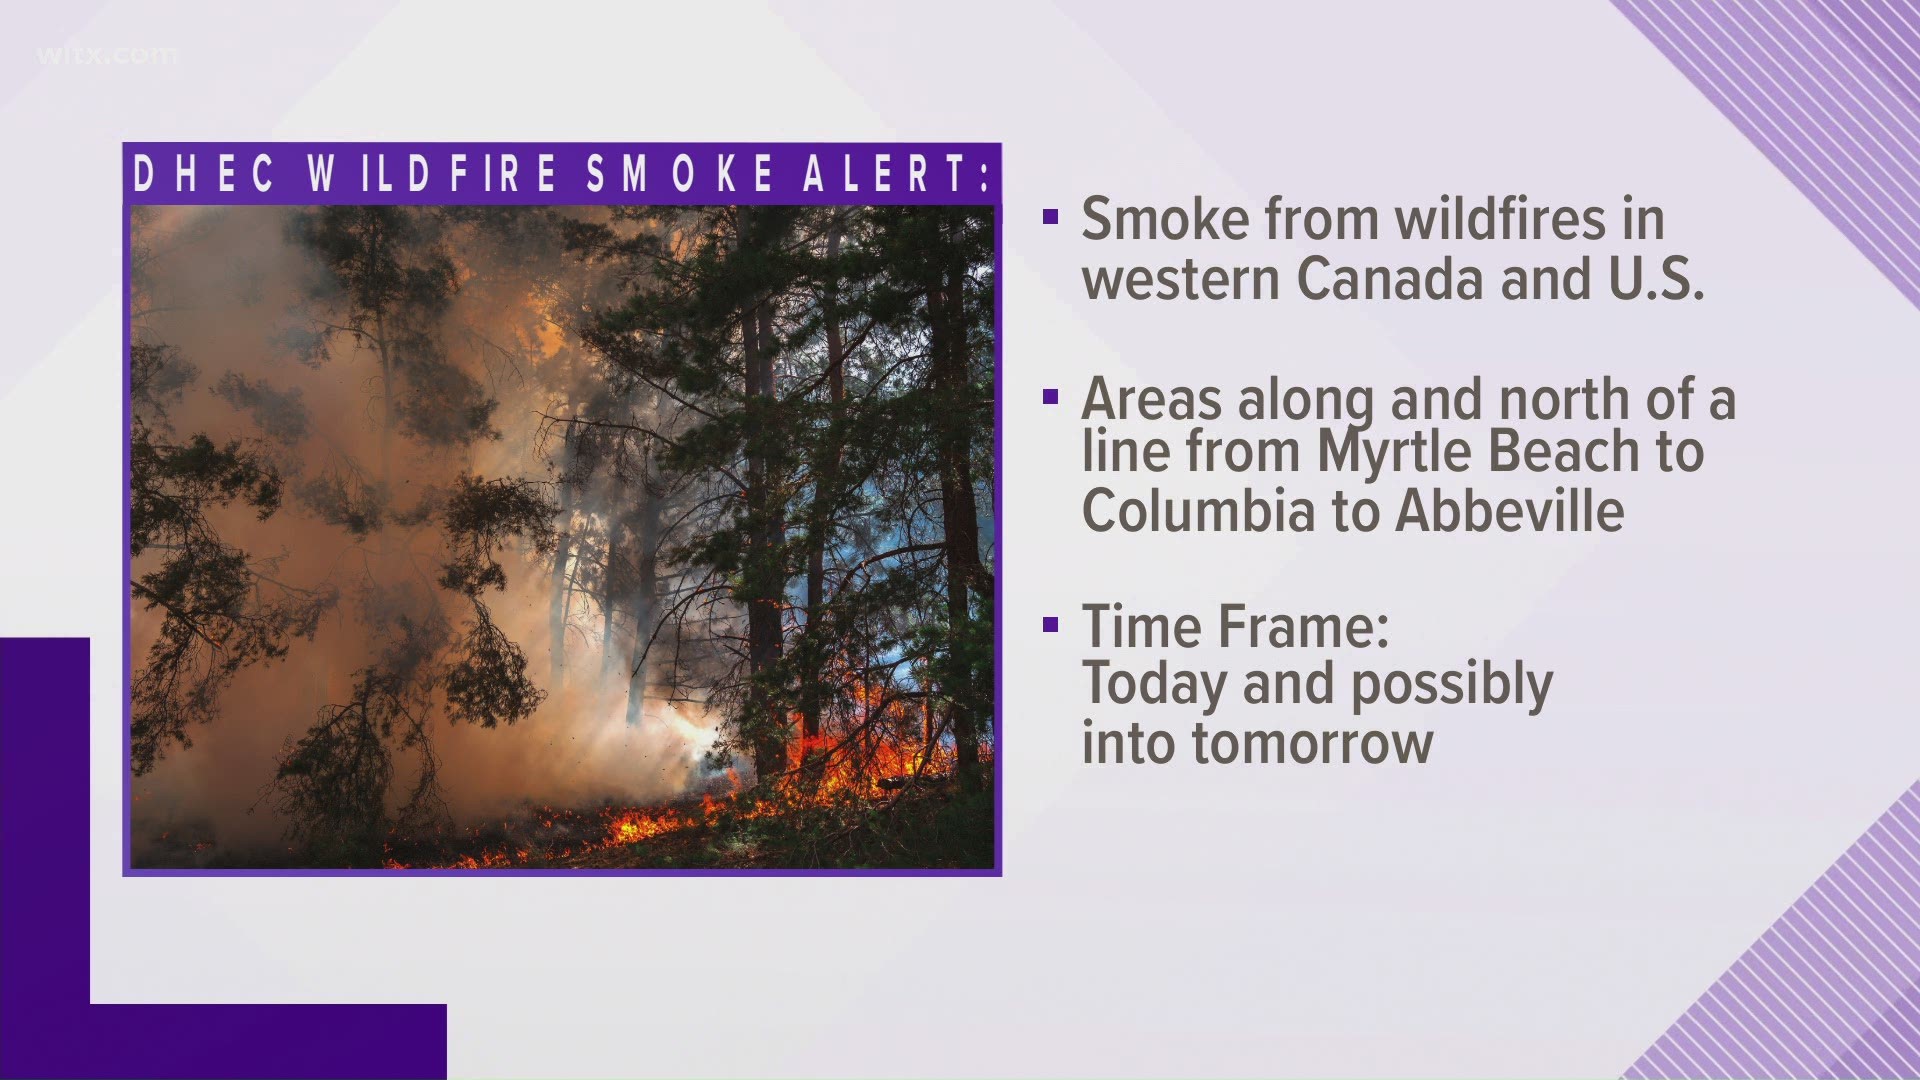 Most of the significant impacts from the smoke will be in areas along and north of Myrtle Beach to Columbia to Abbeville in the upstate.